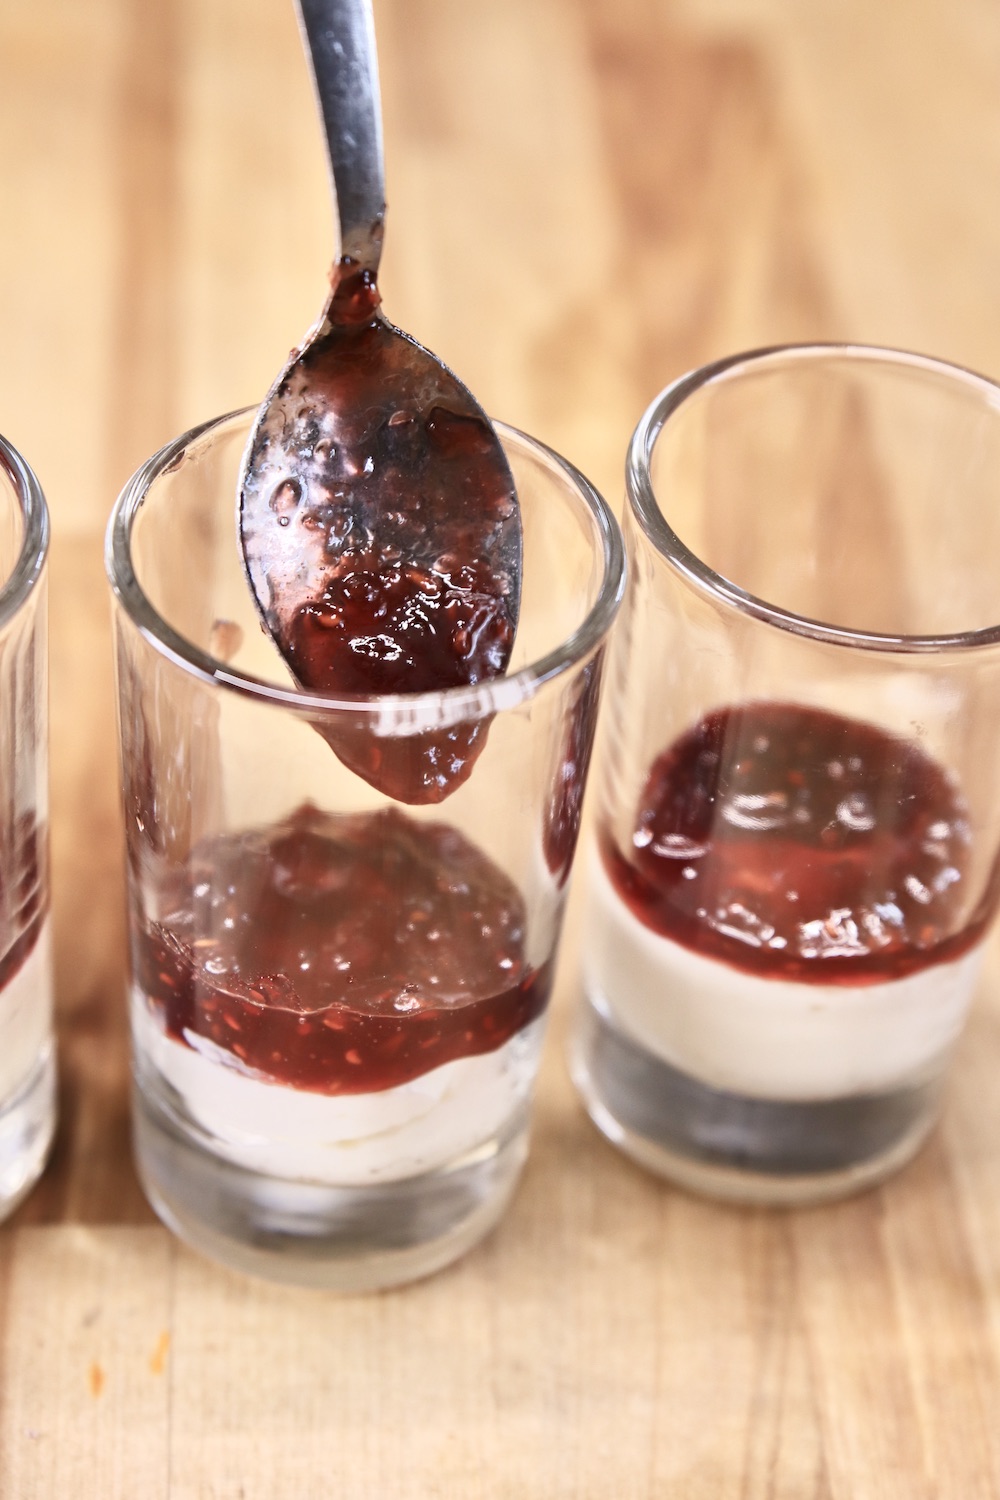 spooning raspberry preserves into a dessert glass with cheesecake filling